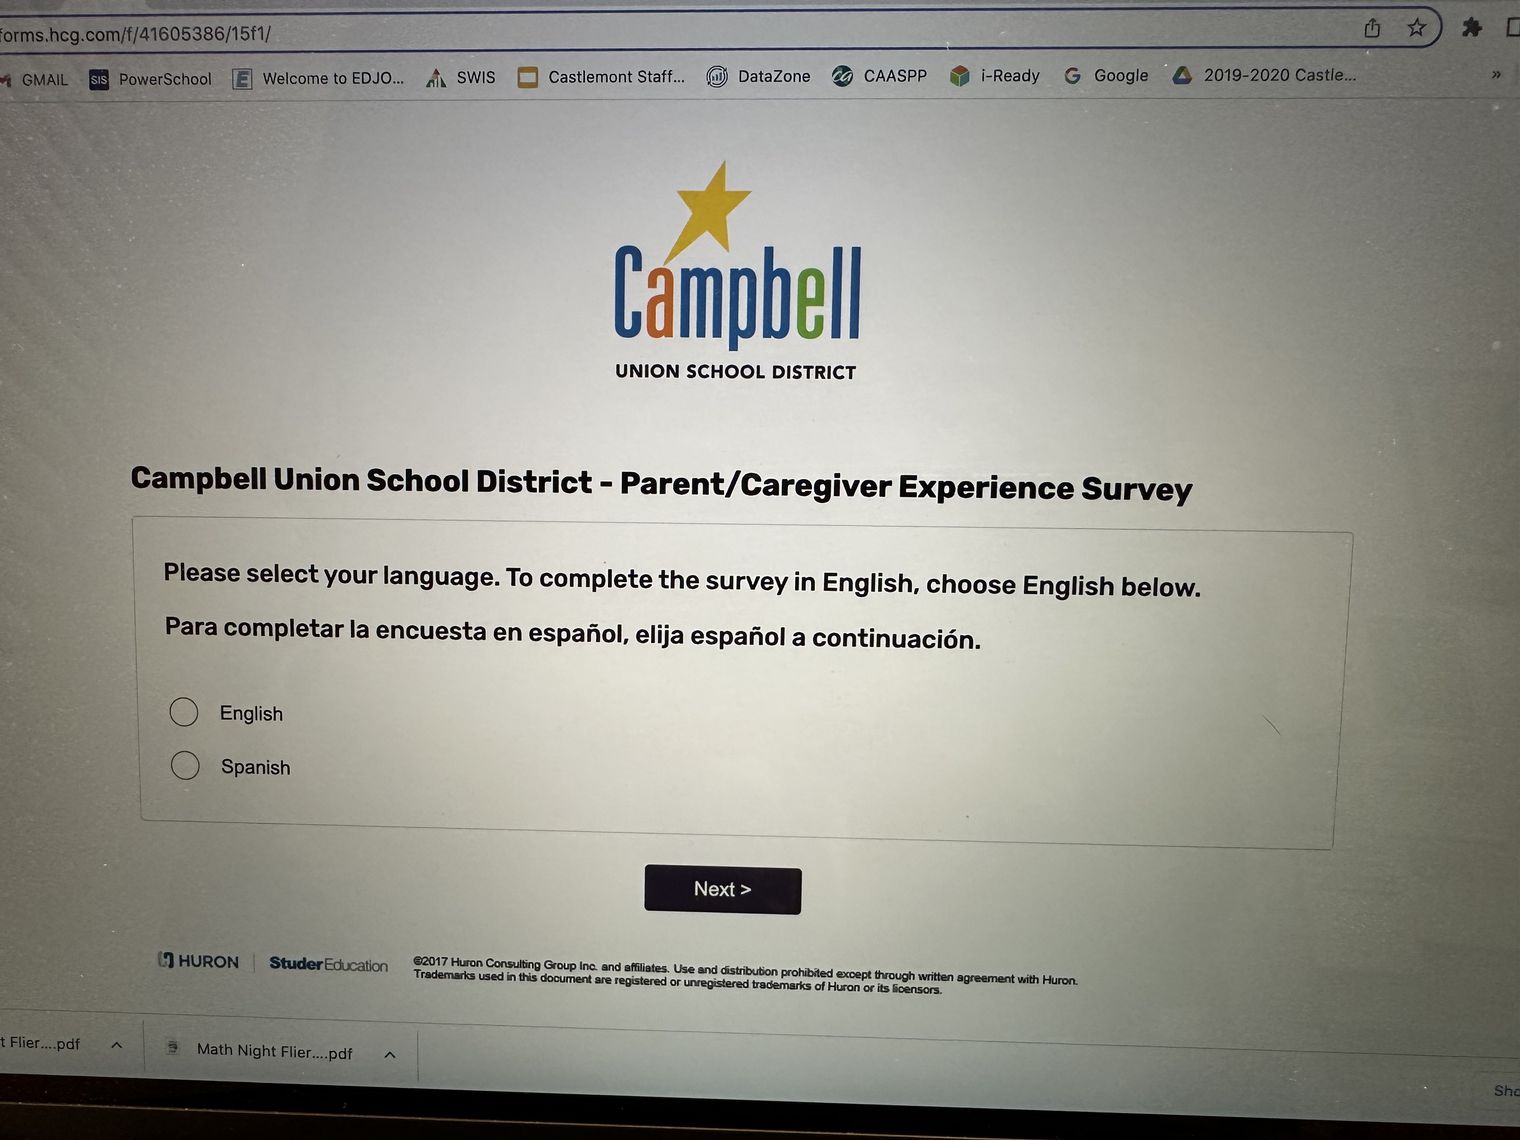 CUSD Survey page with language options